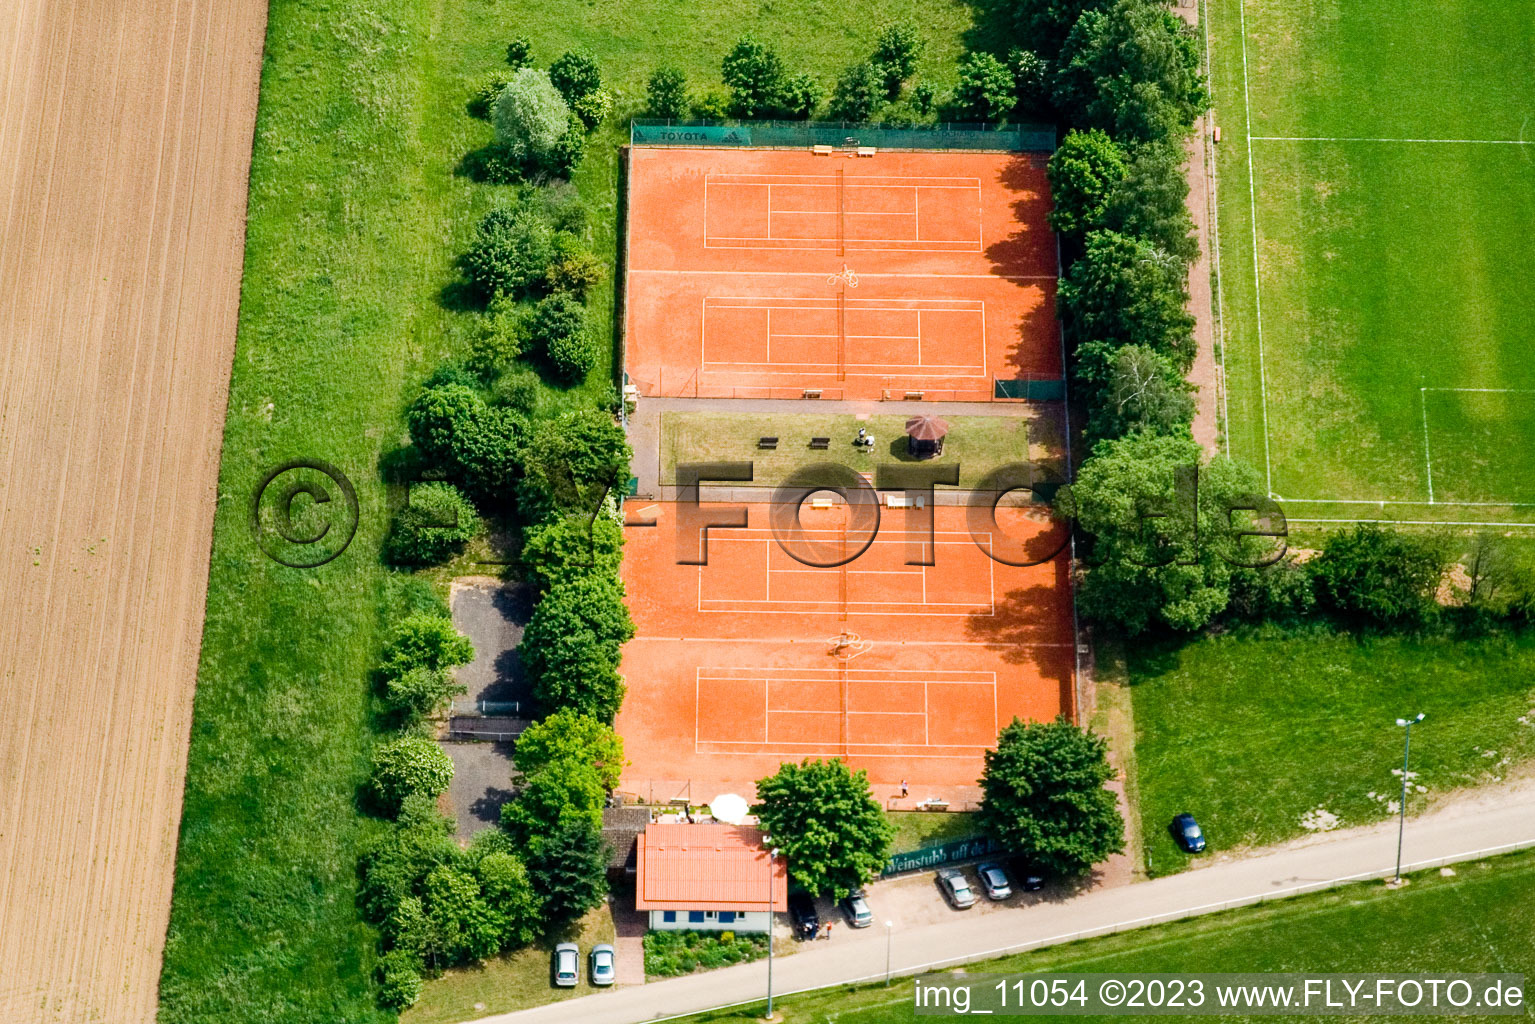 Tennis club in Minfeld in the state Rhineland-Palatinate, Germany